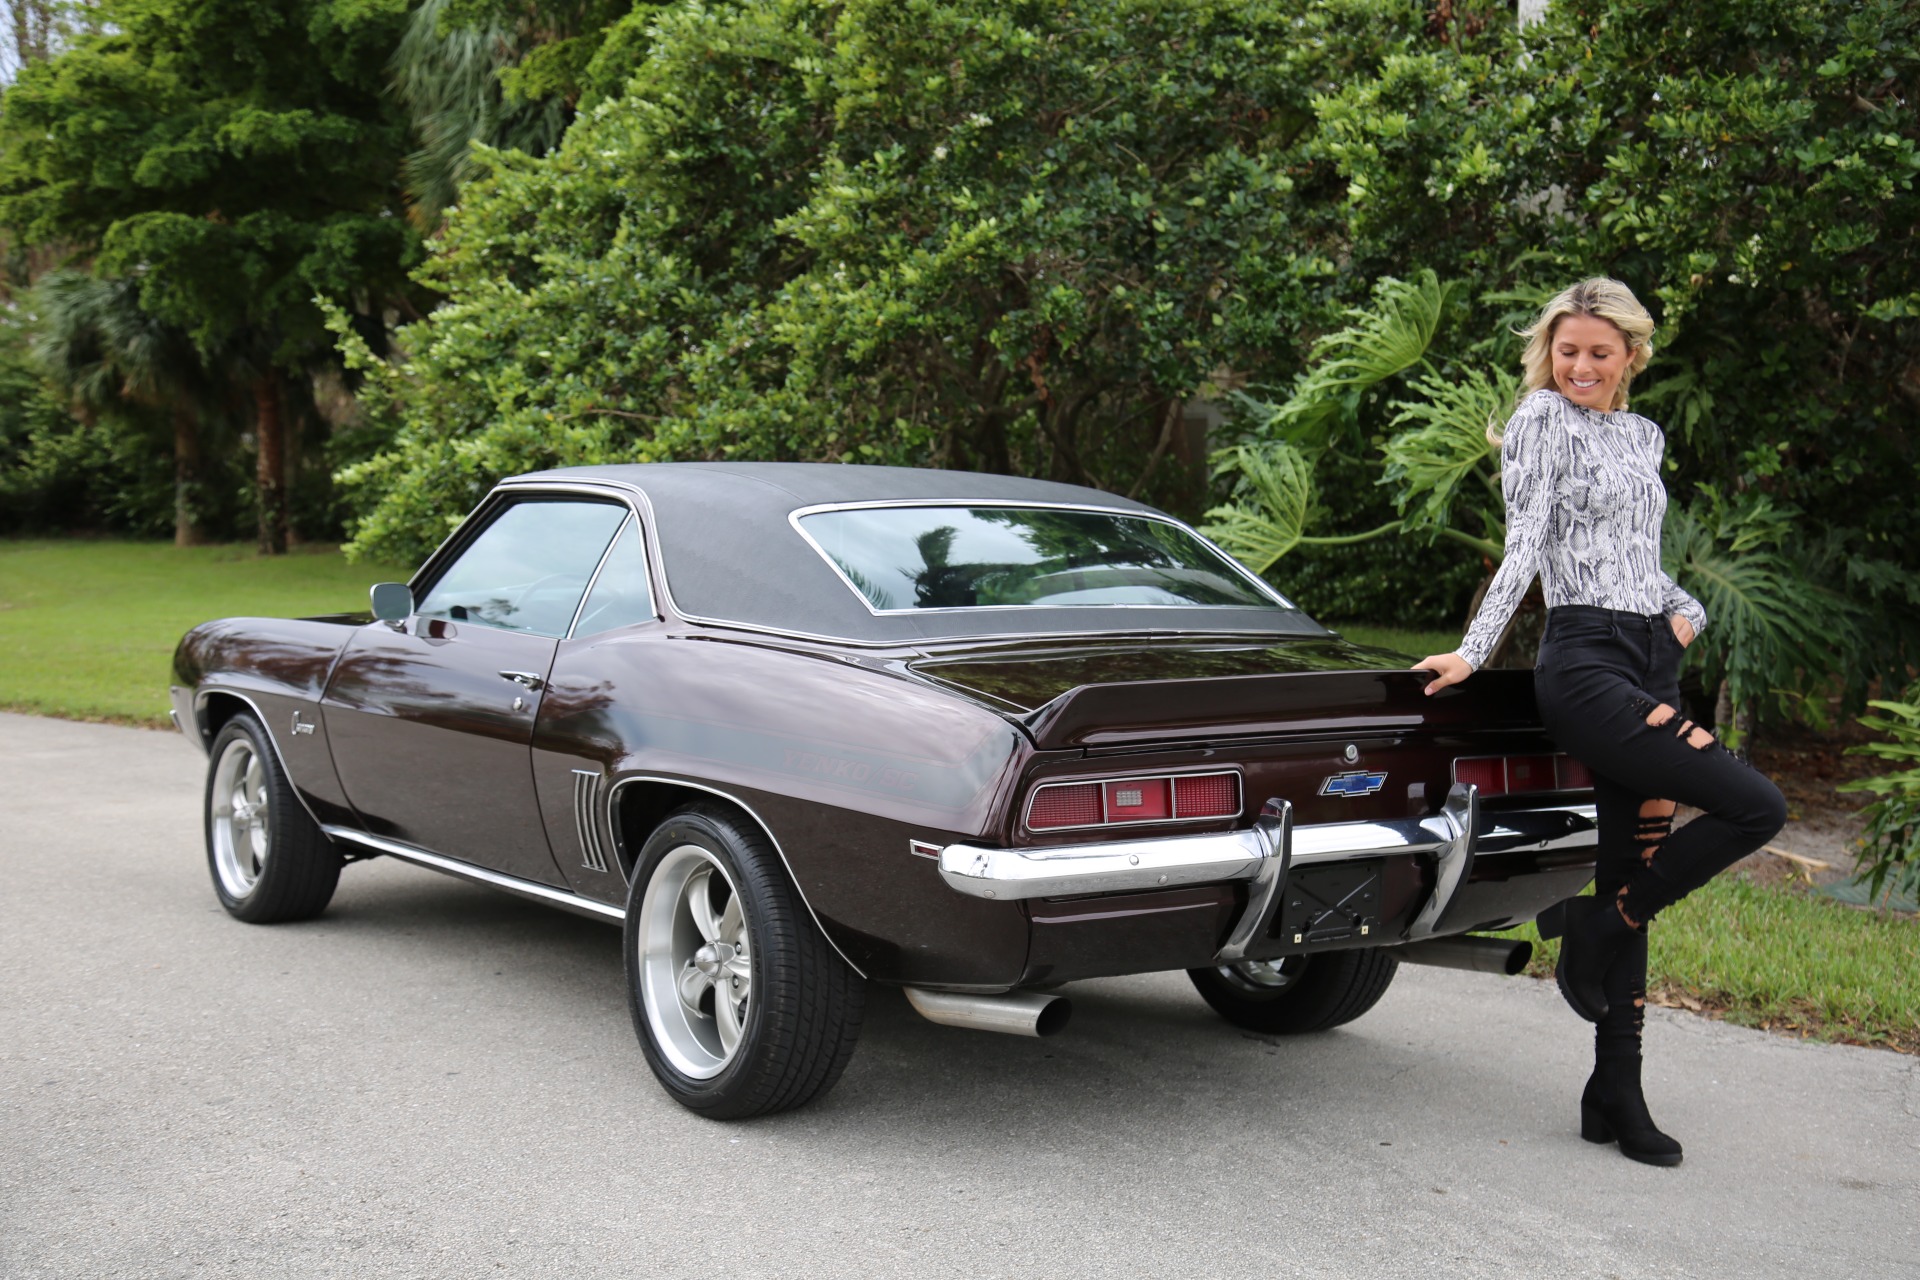 Used 1969 Chevrolet Camaro V8 4 Speed Manual for sale Sold at Muscle Cars for Sale Inc. in Fort Myers FL 33912 6